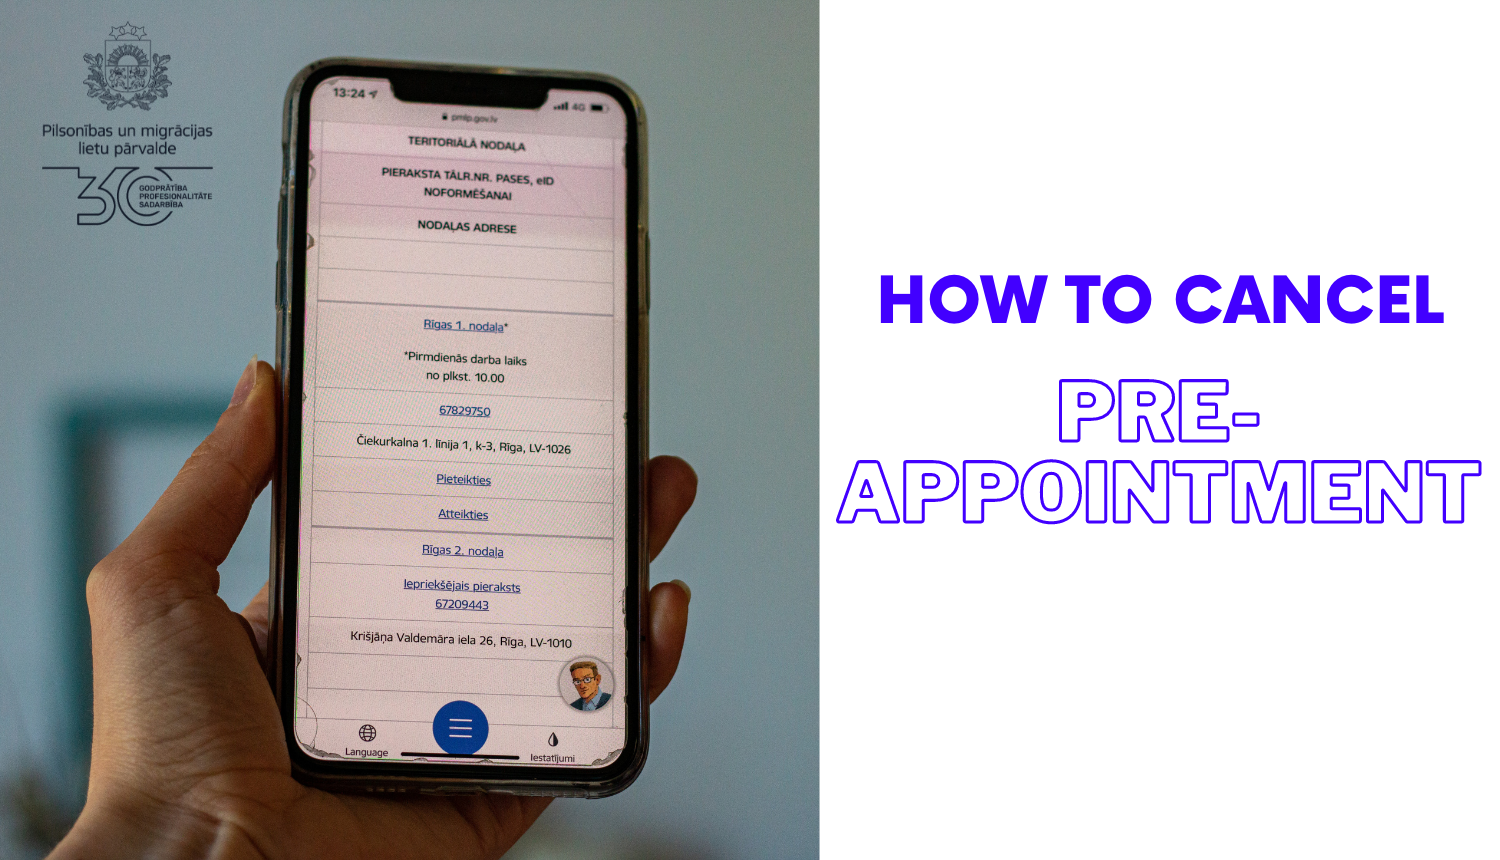 How to cancel pre- Appointment